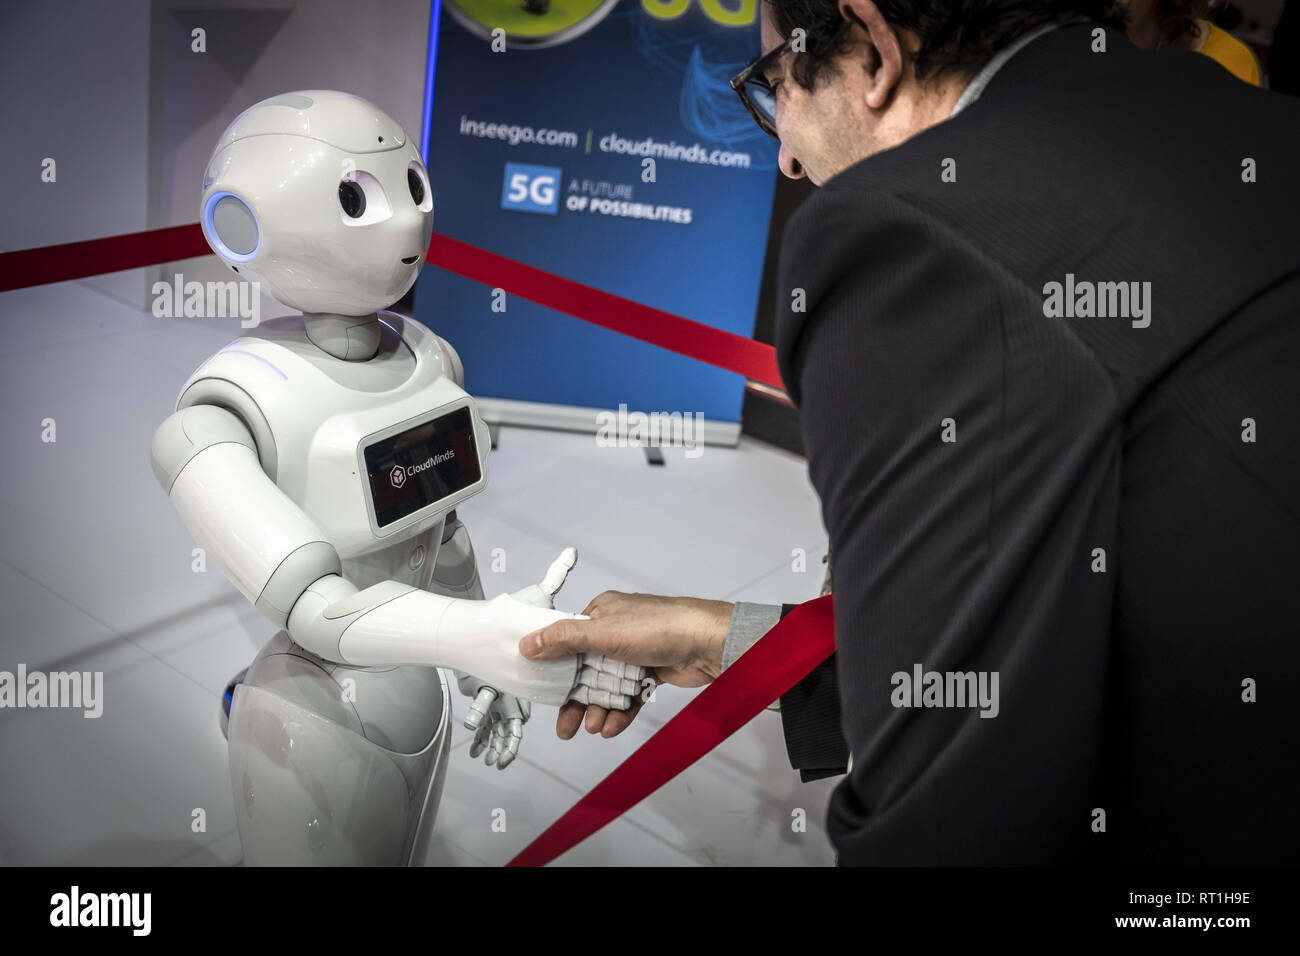 Barcelona, Catalonia, Spain. 27th Feb, 2019. The humanoid robot Pepper of  the American company CloudMinds is seen shaking hands with a visitor during  the MWC2019.The MWC2019 Mobile World Congress opens its doors